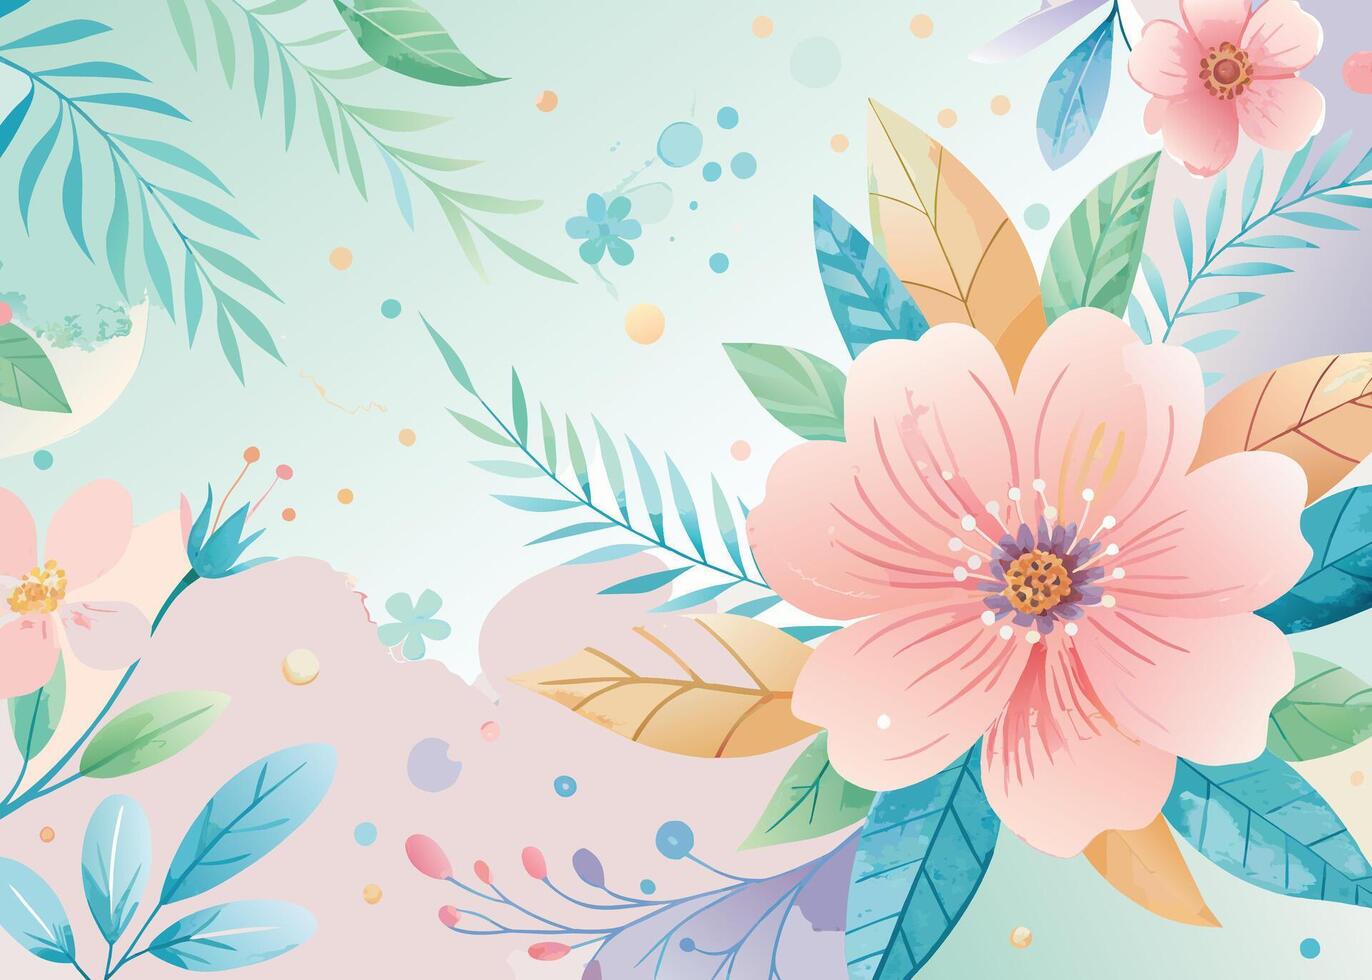 watercolor Floral background with hand drawn flowers and leaves. Vector illustration.